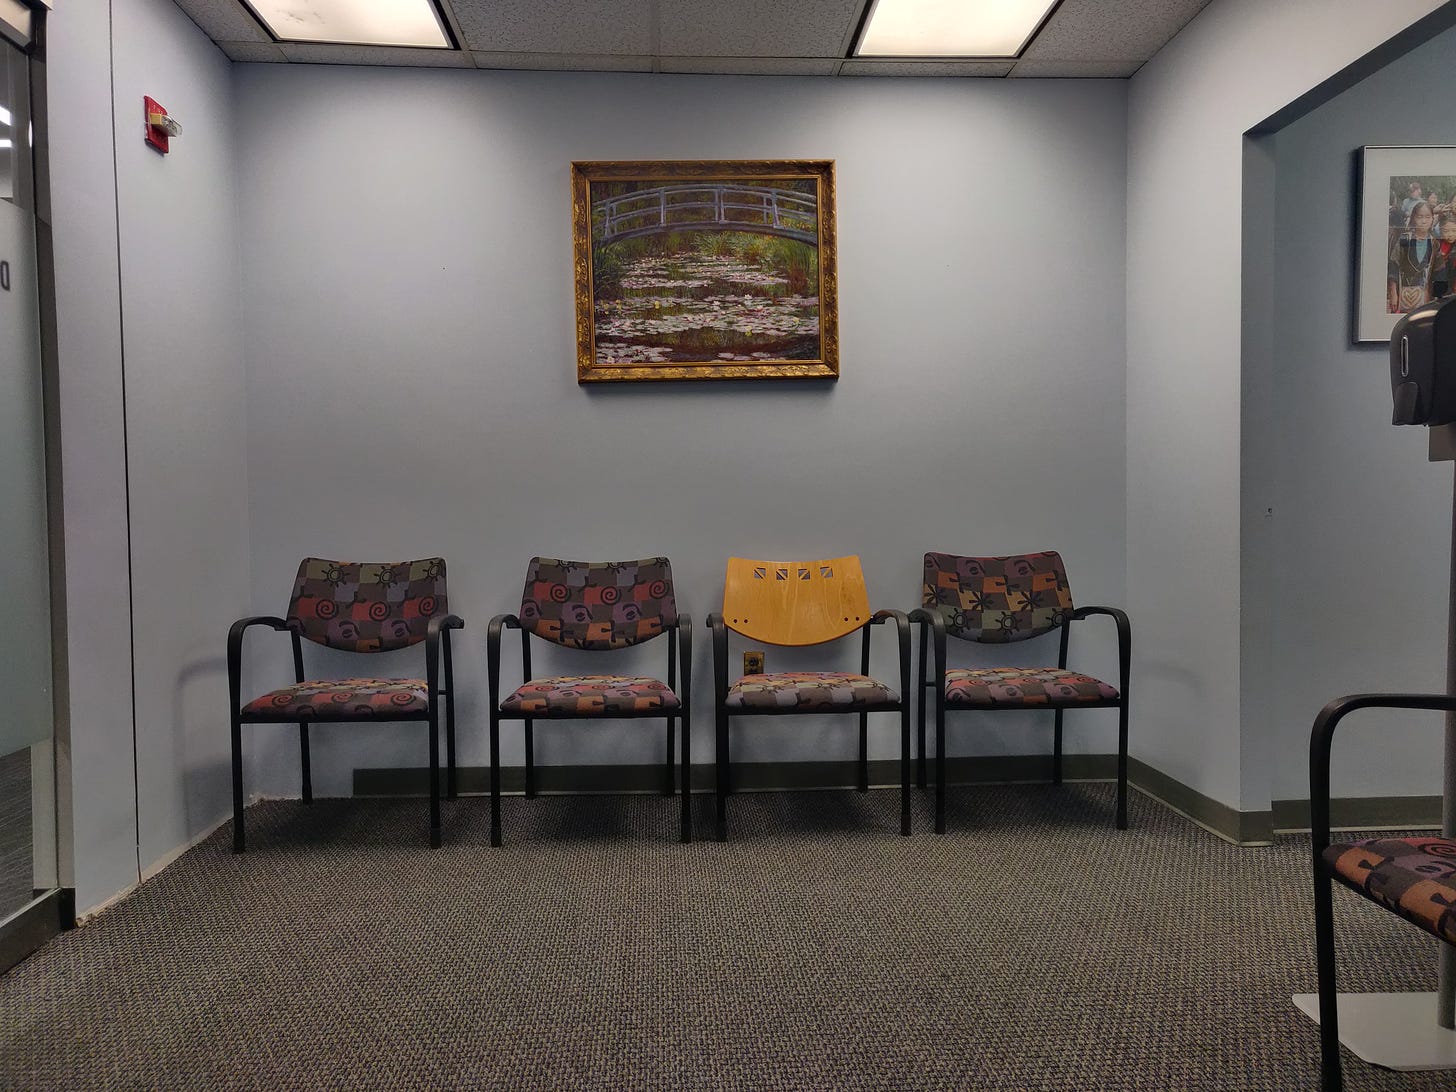 File:Doctor office waiting room.jpg - Wikimedia Commons